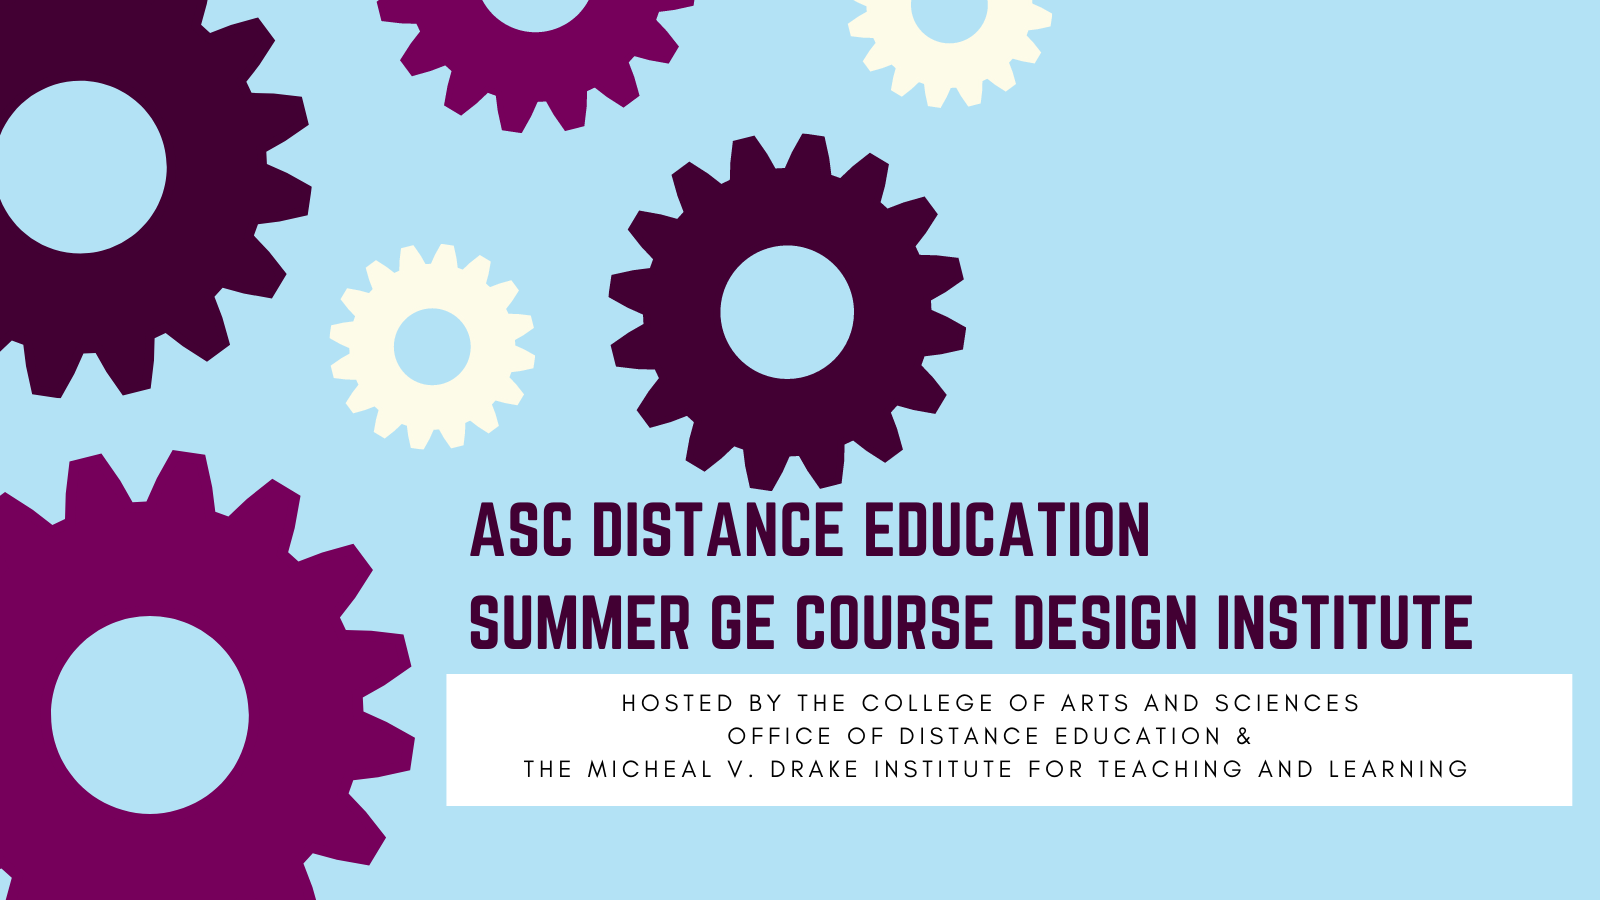 Decorative Image with Gears and the text, "The Distance Education GE Course Design Institute"